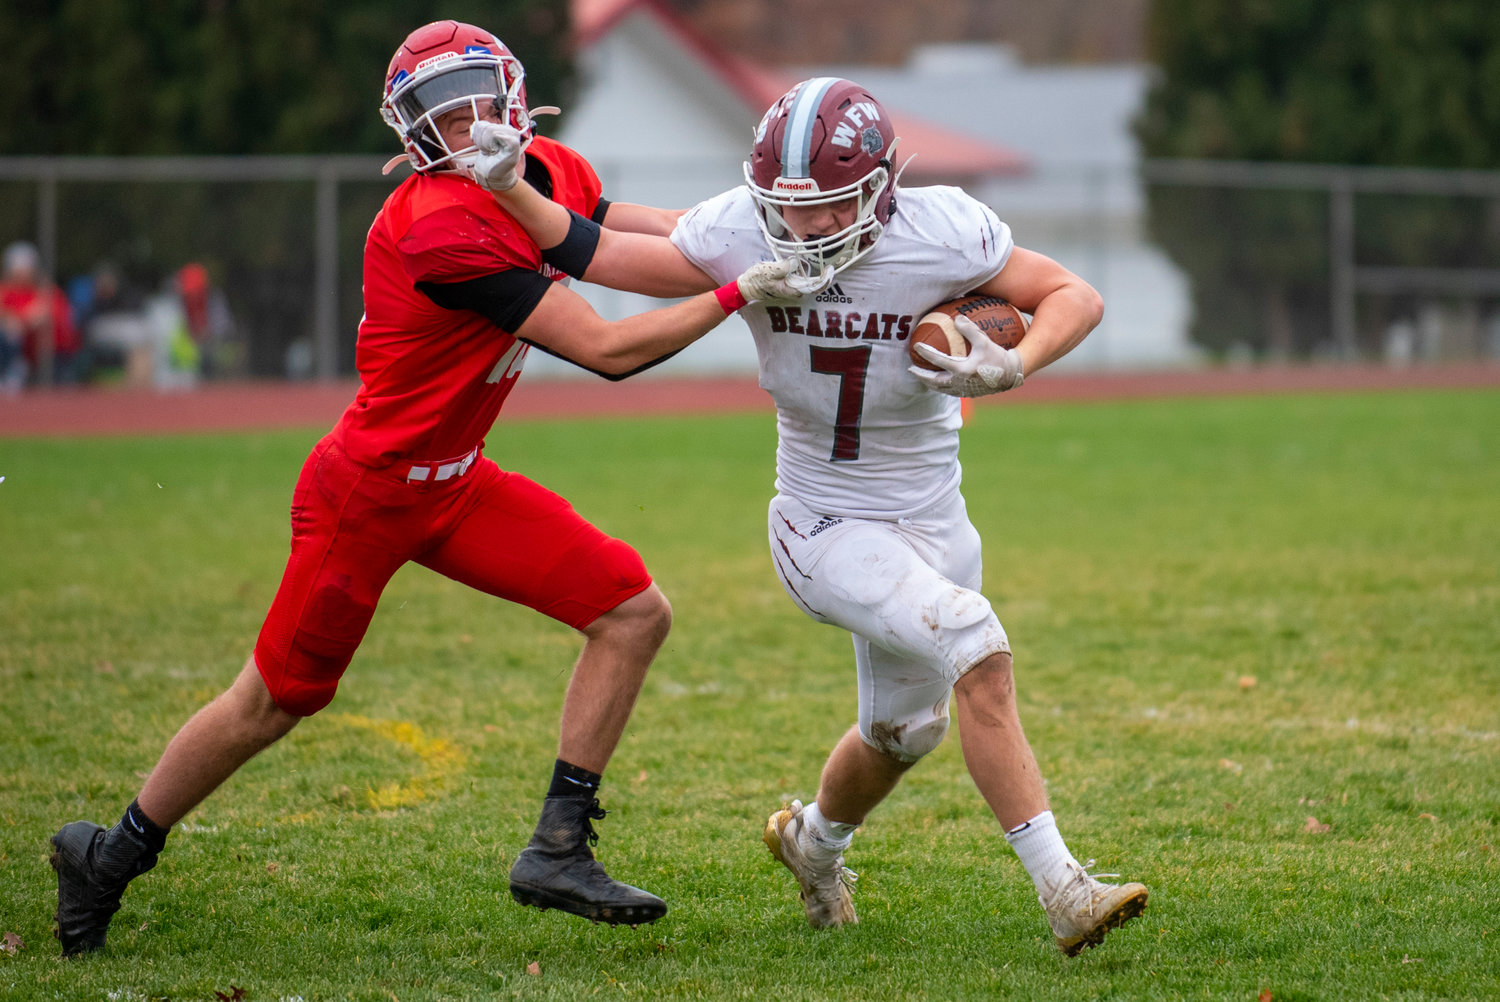 W.F. West running back Brock Guyette (7) stiff-arms a Prosser defender during the Bearcats’ state playoff game against the Mustangs on Saturday in Prosser.